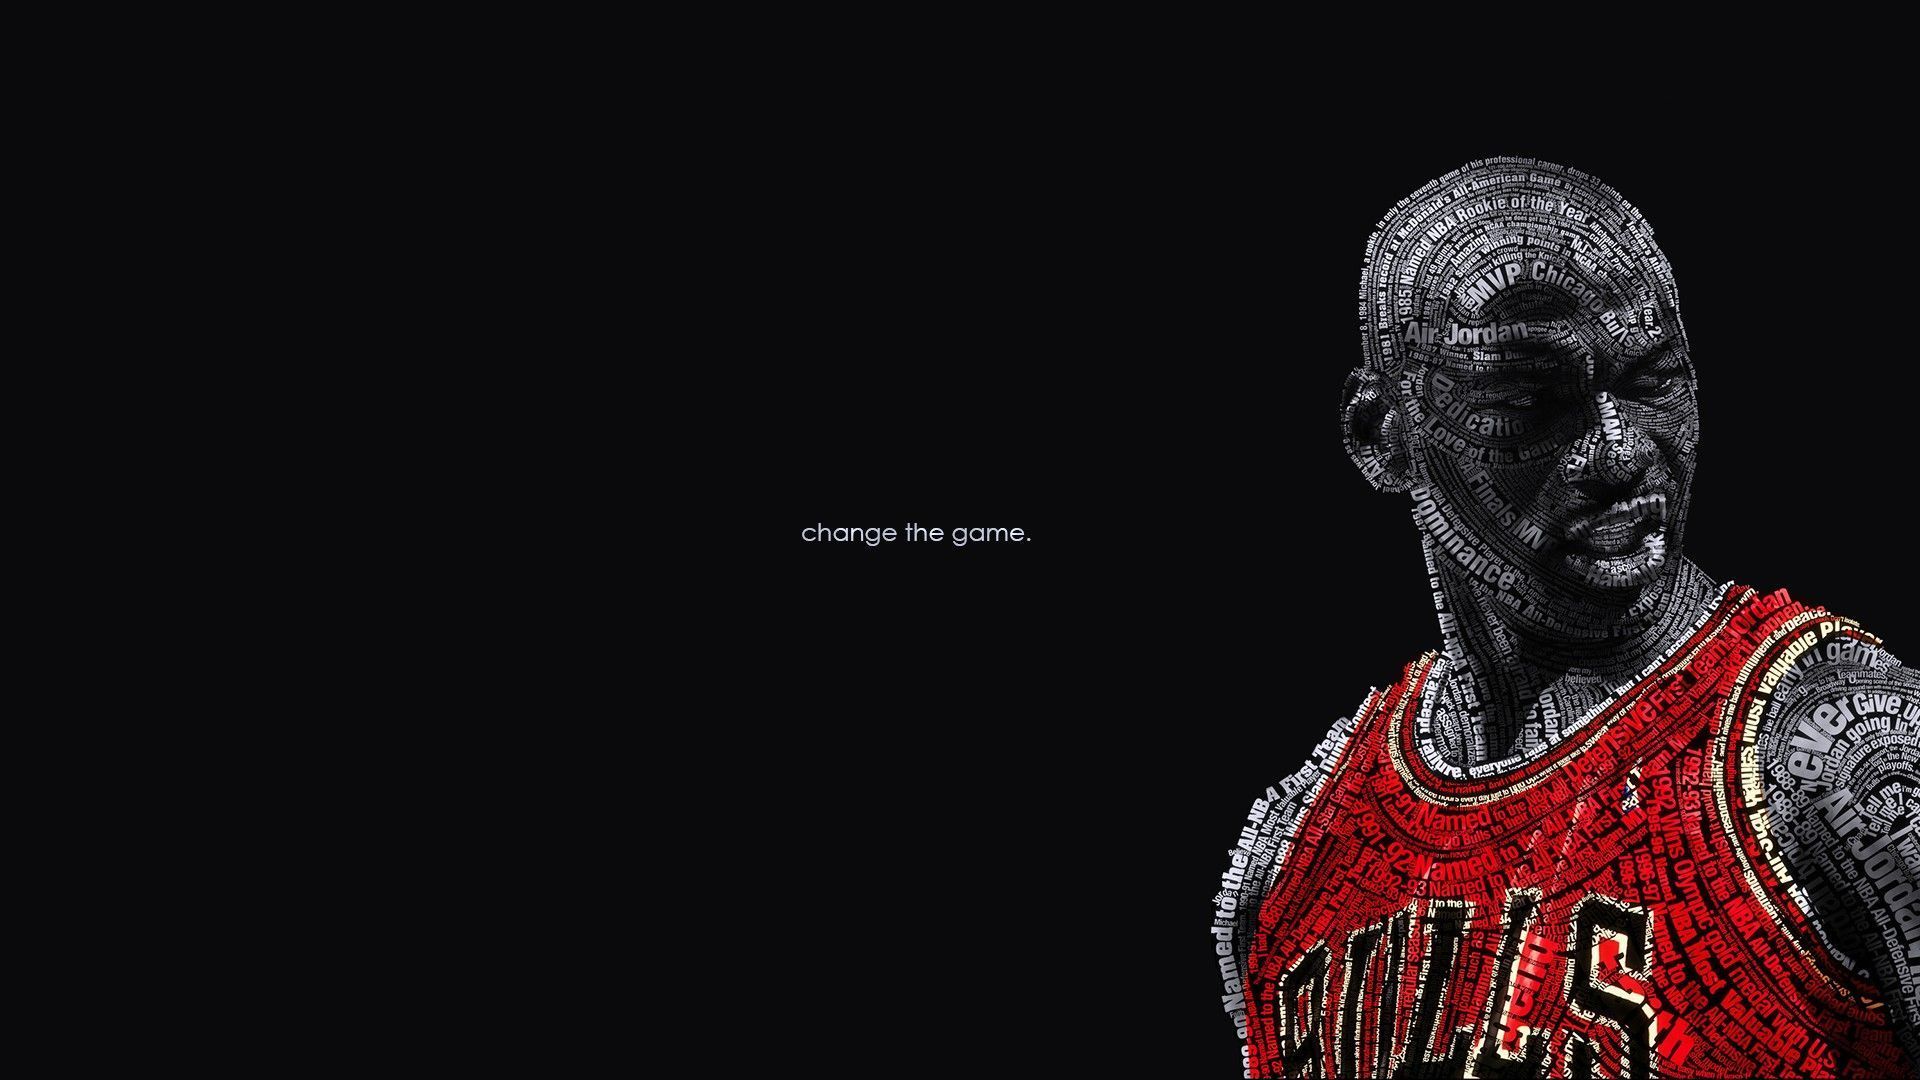 Basketball Wallpapers 2 - Best Wallpaper Collection